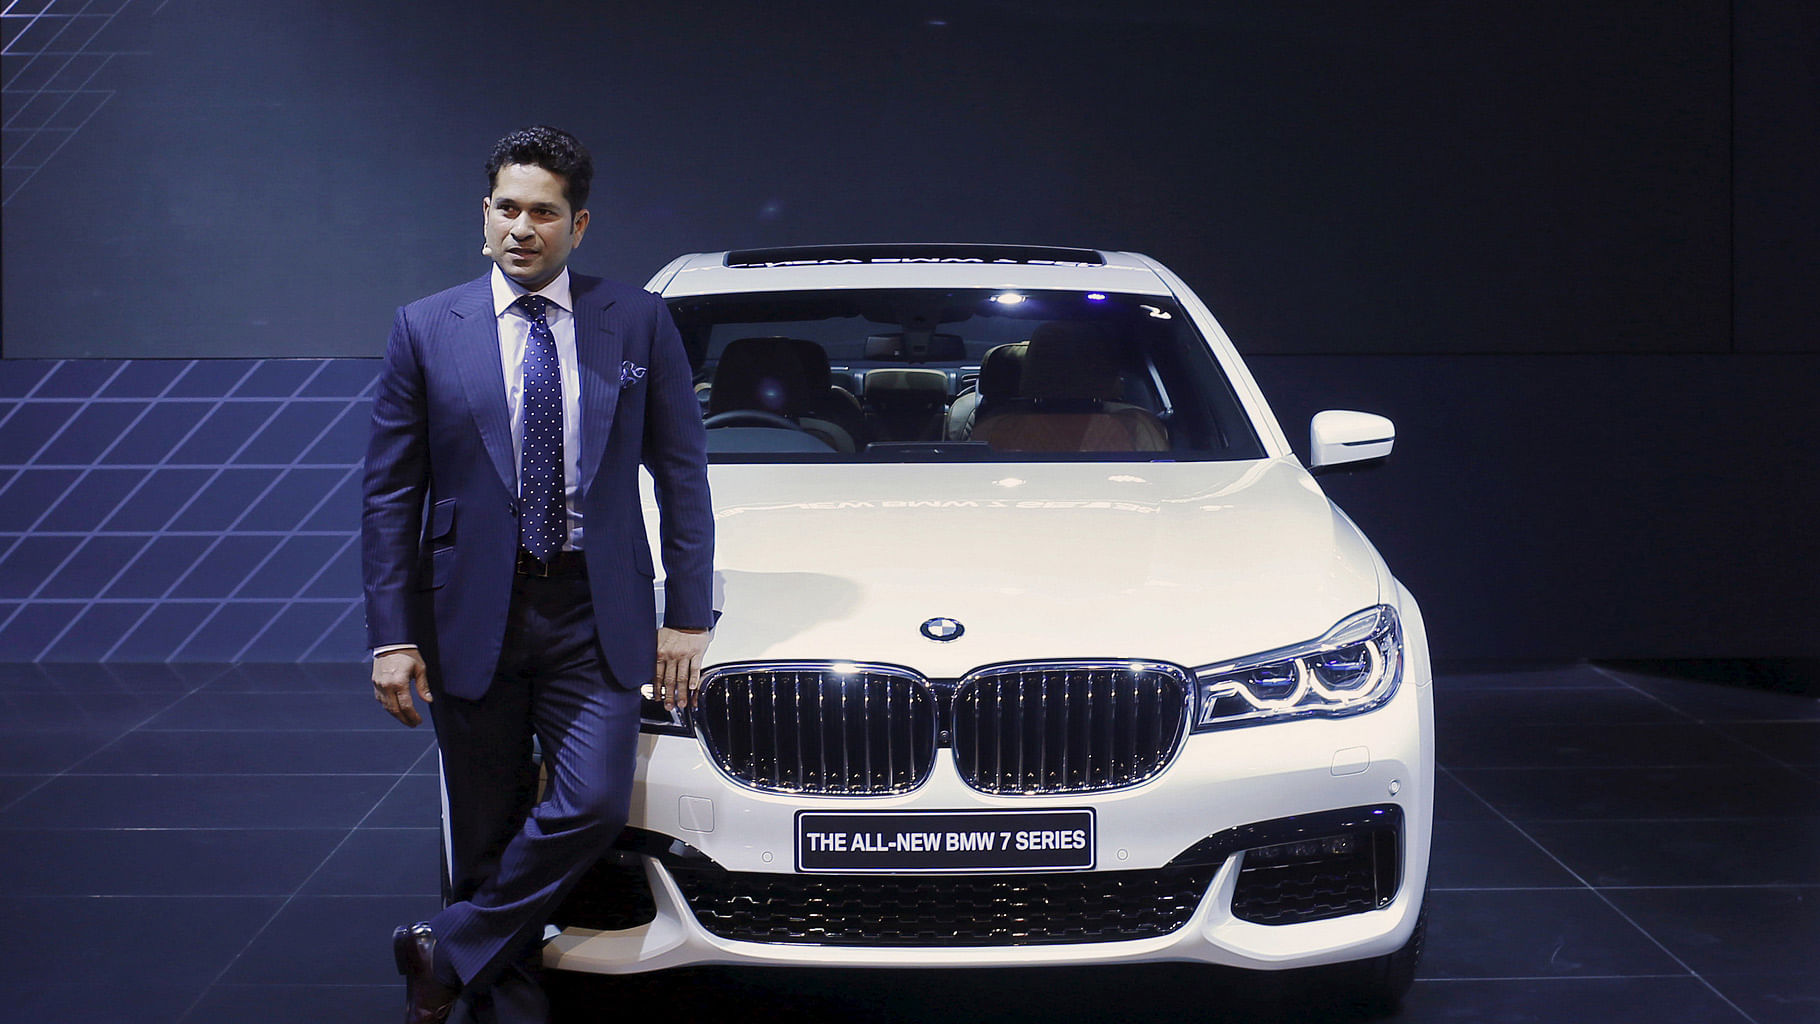 

Sachin Tendulkar takes the stage to launch BMW X1 SUV and the BMW 7 Series luxury sedan for the Indian market. (Photo: Reuters)